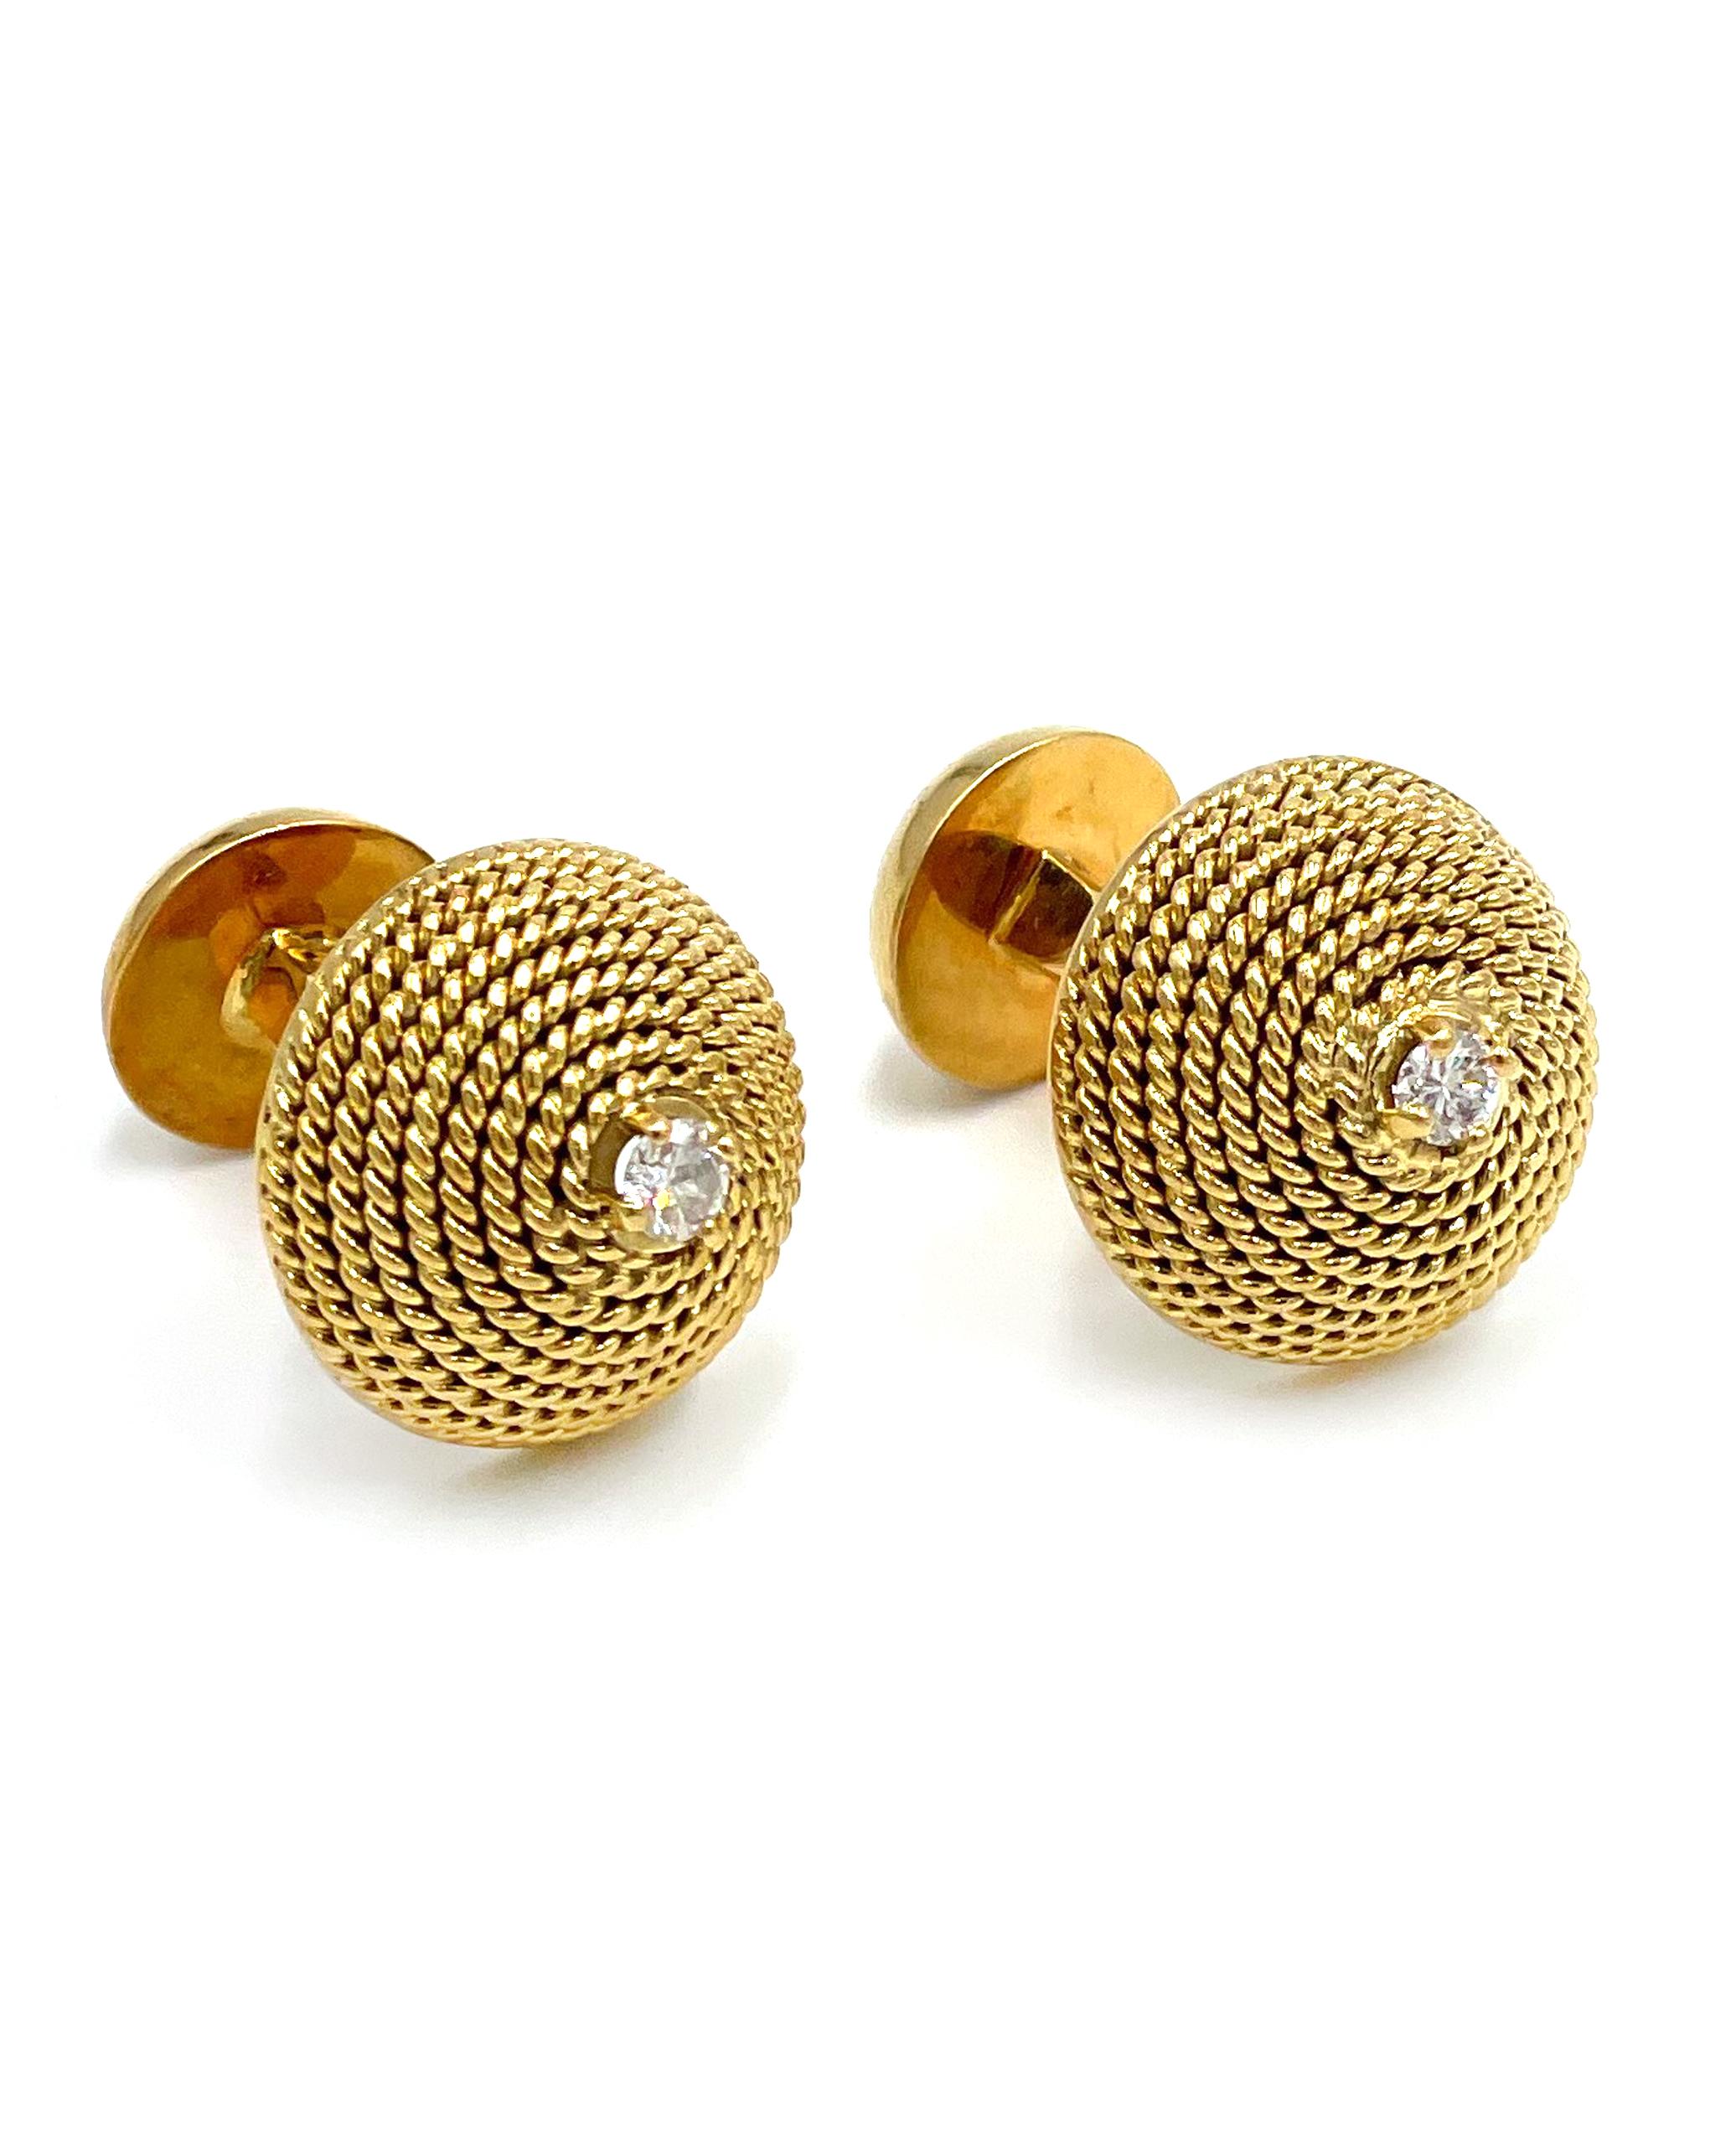 Preowned pair of 18K yellow gold and diamond cufflinks. The round links are a dome of twisted wire. Each
cufflink has one round brilliant-cut diamond; the total carat weight of both diamonds together is
approximately 0.30 carats.

* The diamonds are